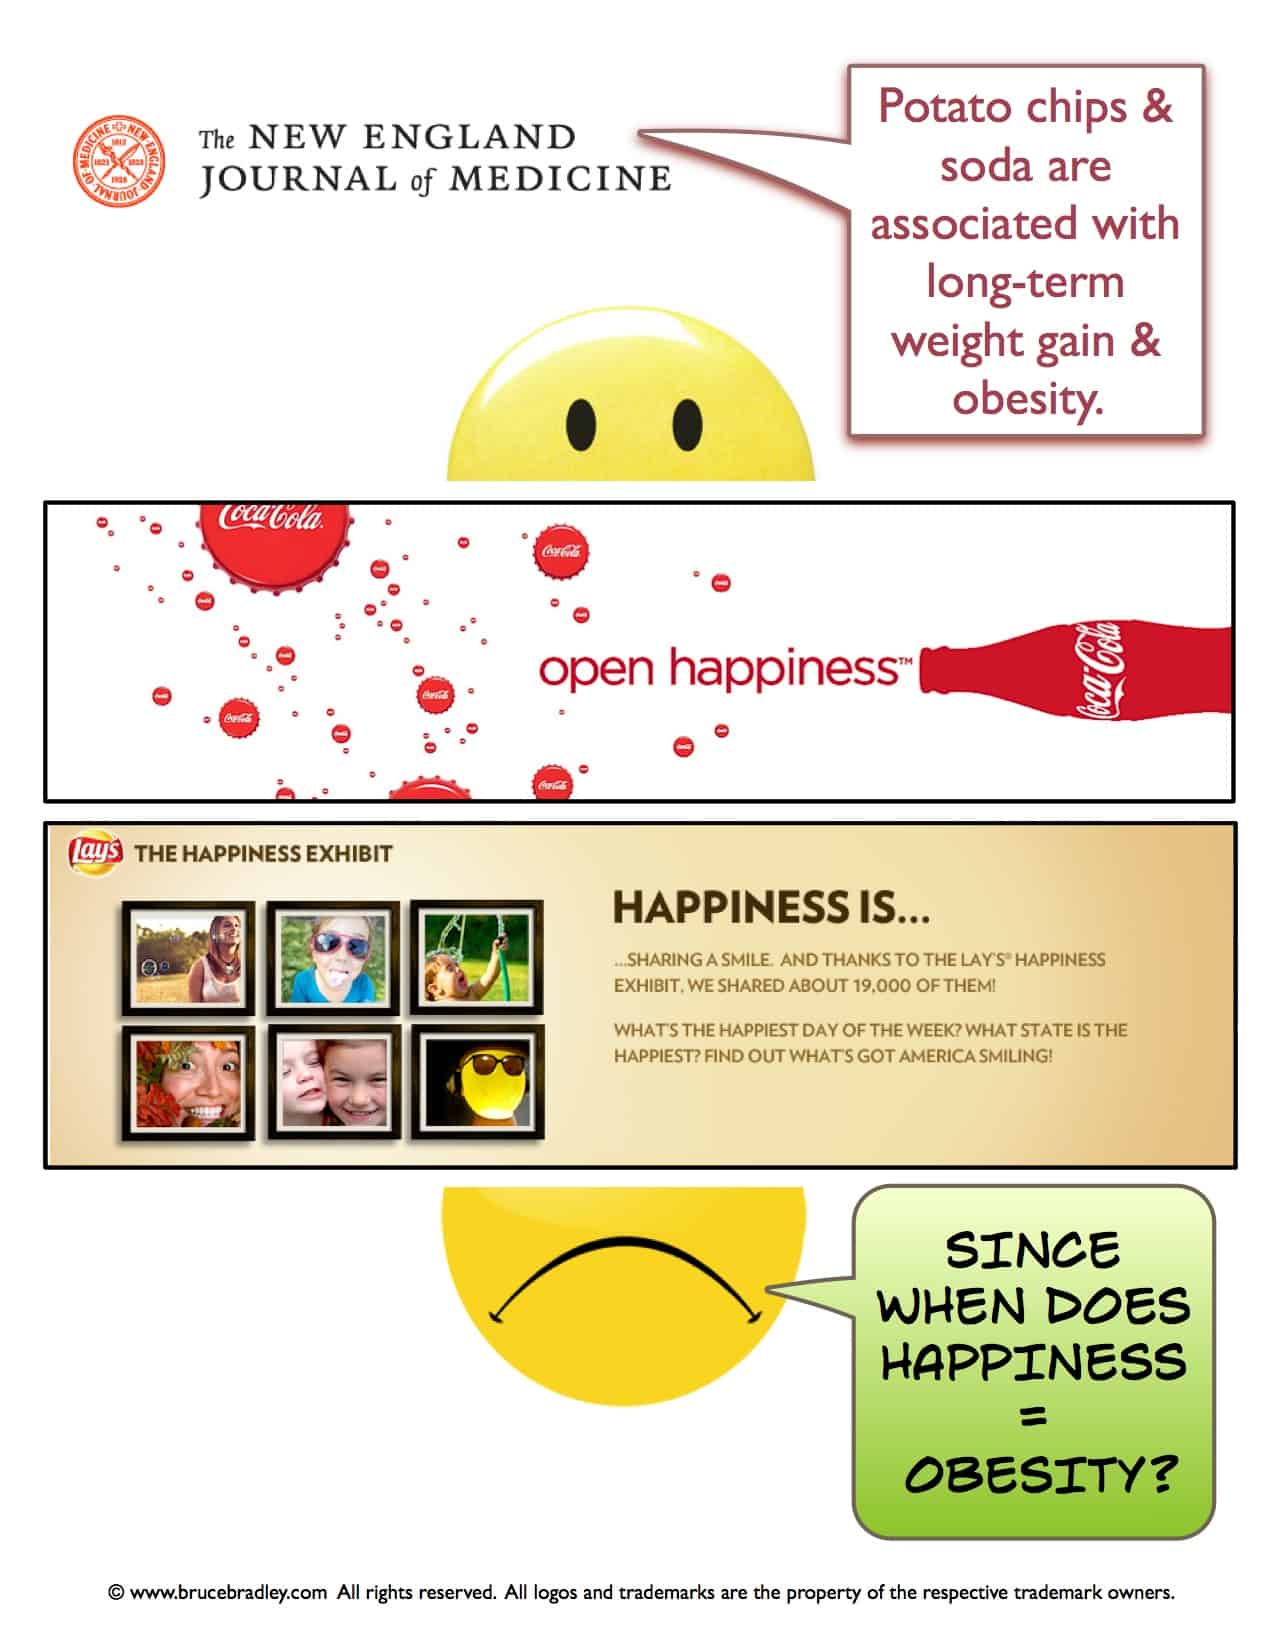 Do Foods That Make You Fat Equal Happiness?